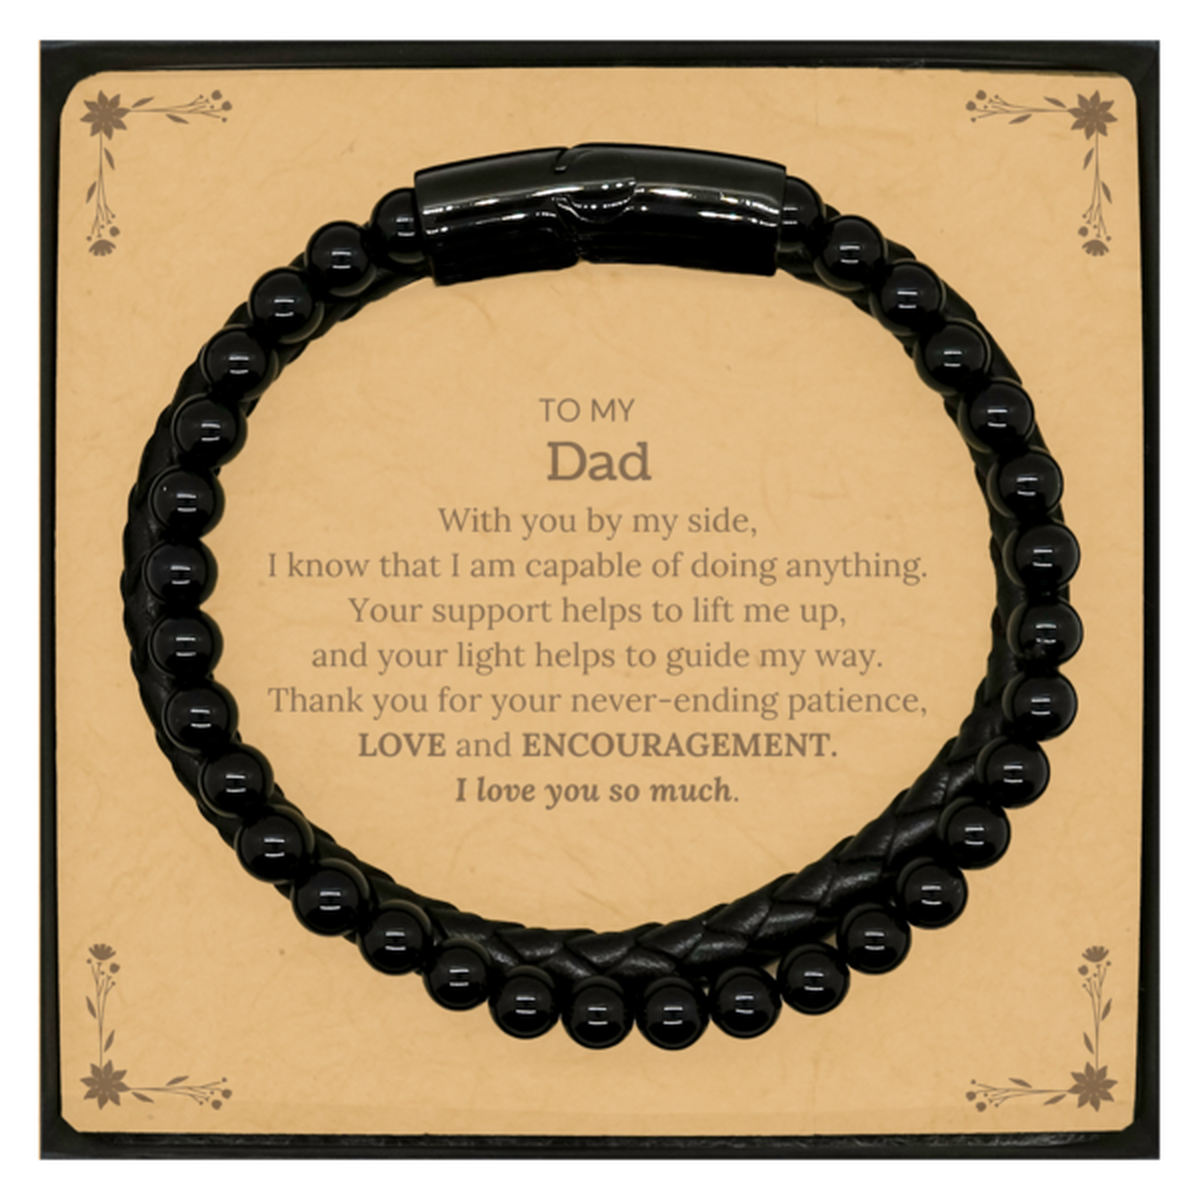 Appreciation Dad Stone Leather Bracelets Gifts, To My Dad Birthday Christmas Wedding Keepsake Gifts for Dad With you by my side, I know that I am capable of doing anything. I love you so much